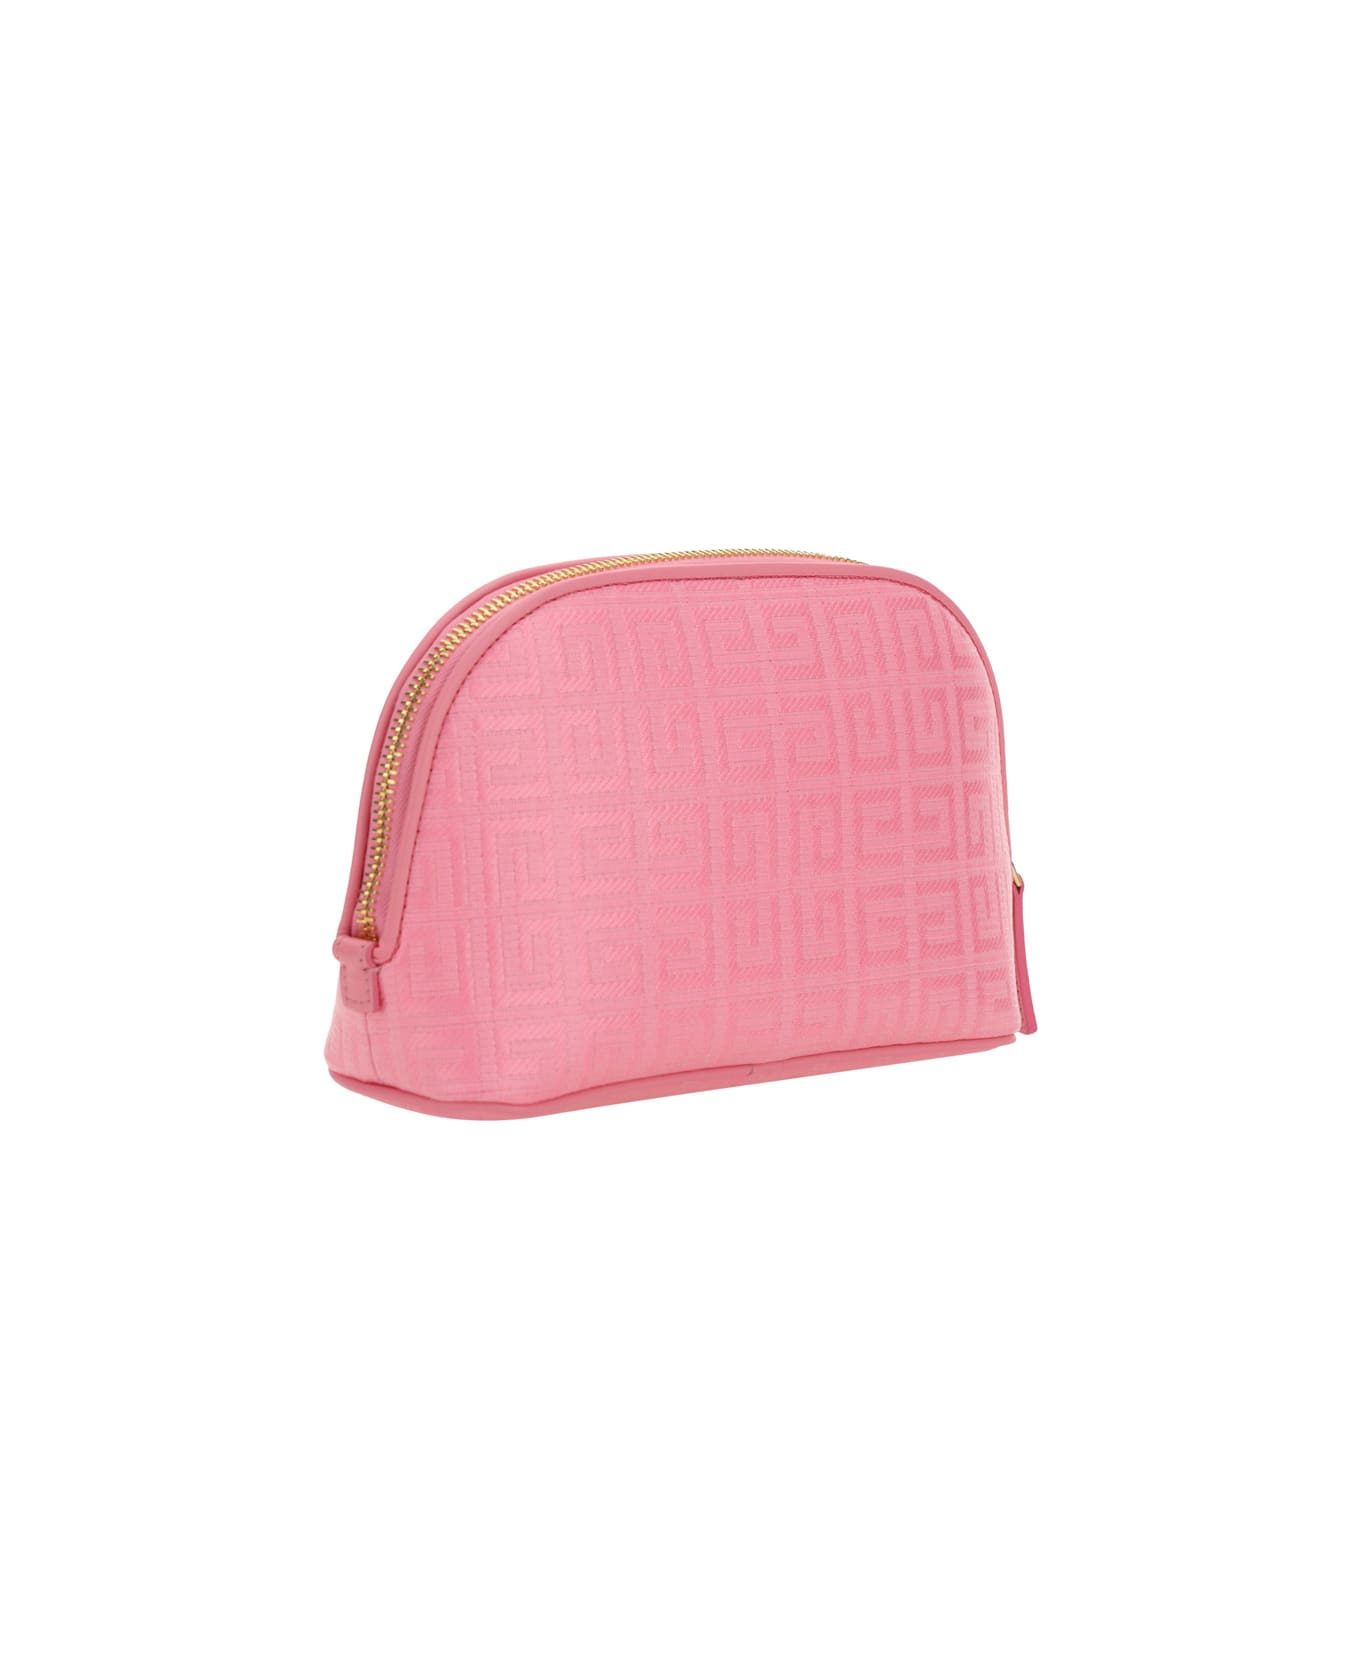 Givenchy G-essentials Pouch - Bright Pink